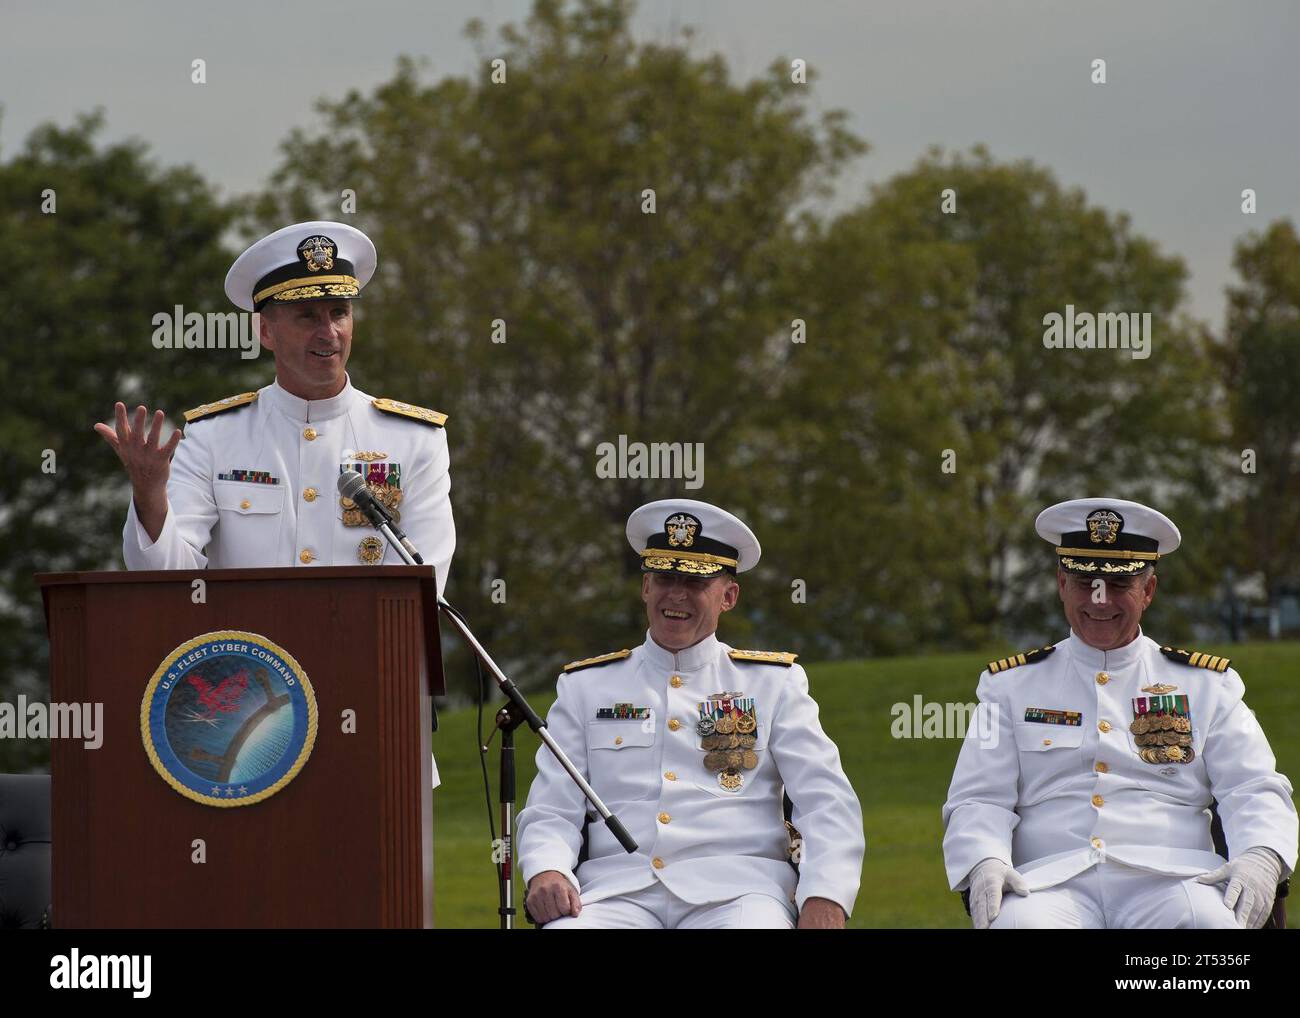 110930KK576-104 BALTIMORE (Sept. 30, 2011) Chief of Naval Operations (CNO) Adm. Jonathan W. Greenert delivers remarks during a change of command ceremony at Fort McHenry National Monument. Vice Adm. Michael S. Rogers relived Vice Adm. Barry McCullough as commander of U.S. Fleet Cyber Command and U.S. 10th Fleet. Fleet Cyber Command is the Navy's central operating authority for networks, cryptologic and signals intelligence, information operations, cyber, electronic warfare, and space capabilities. Stock Photo